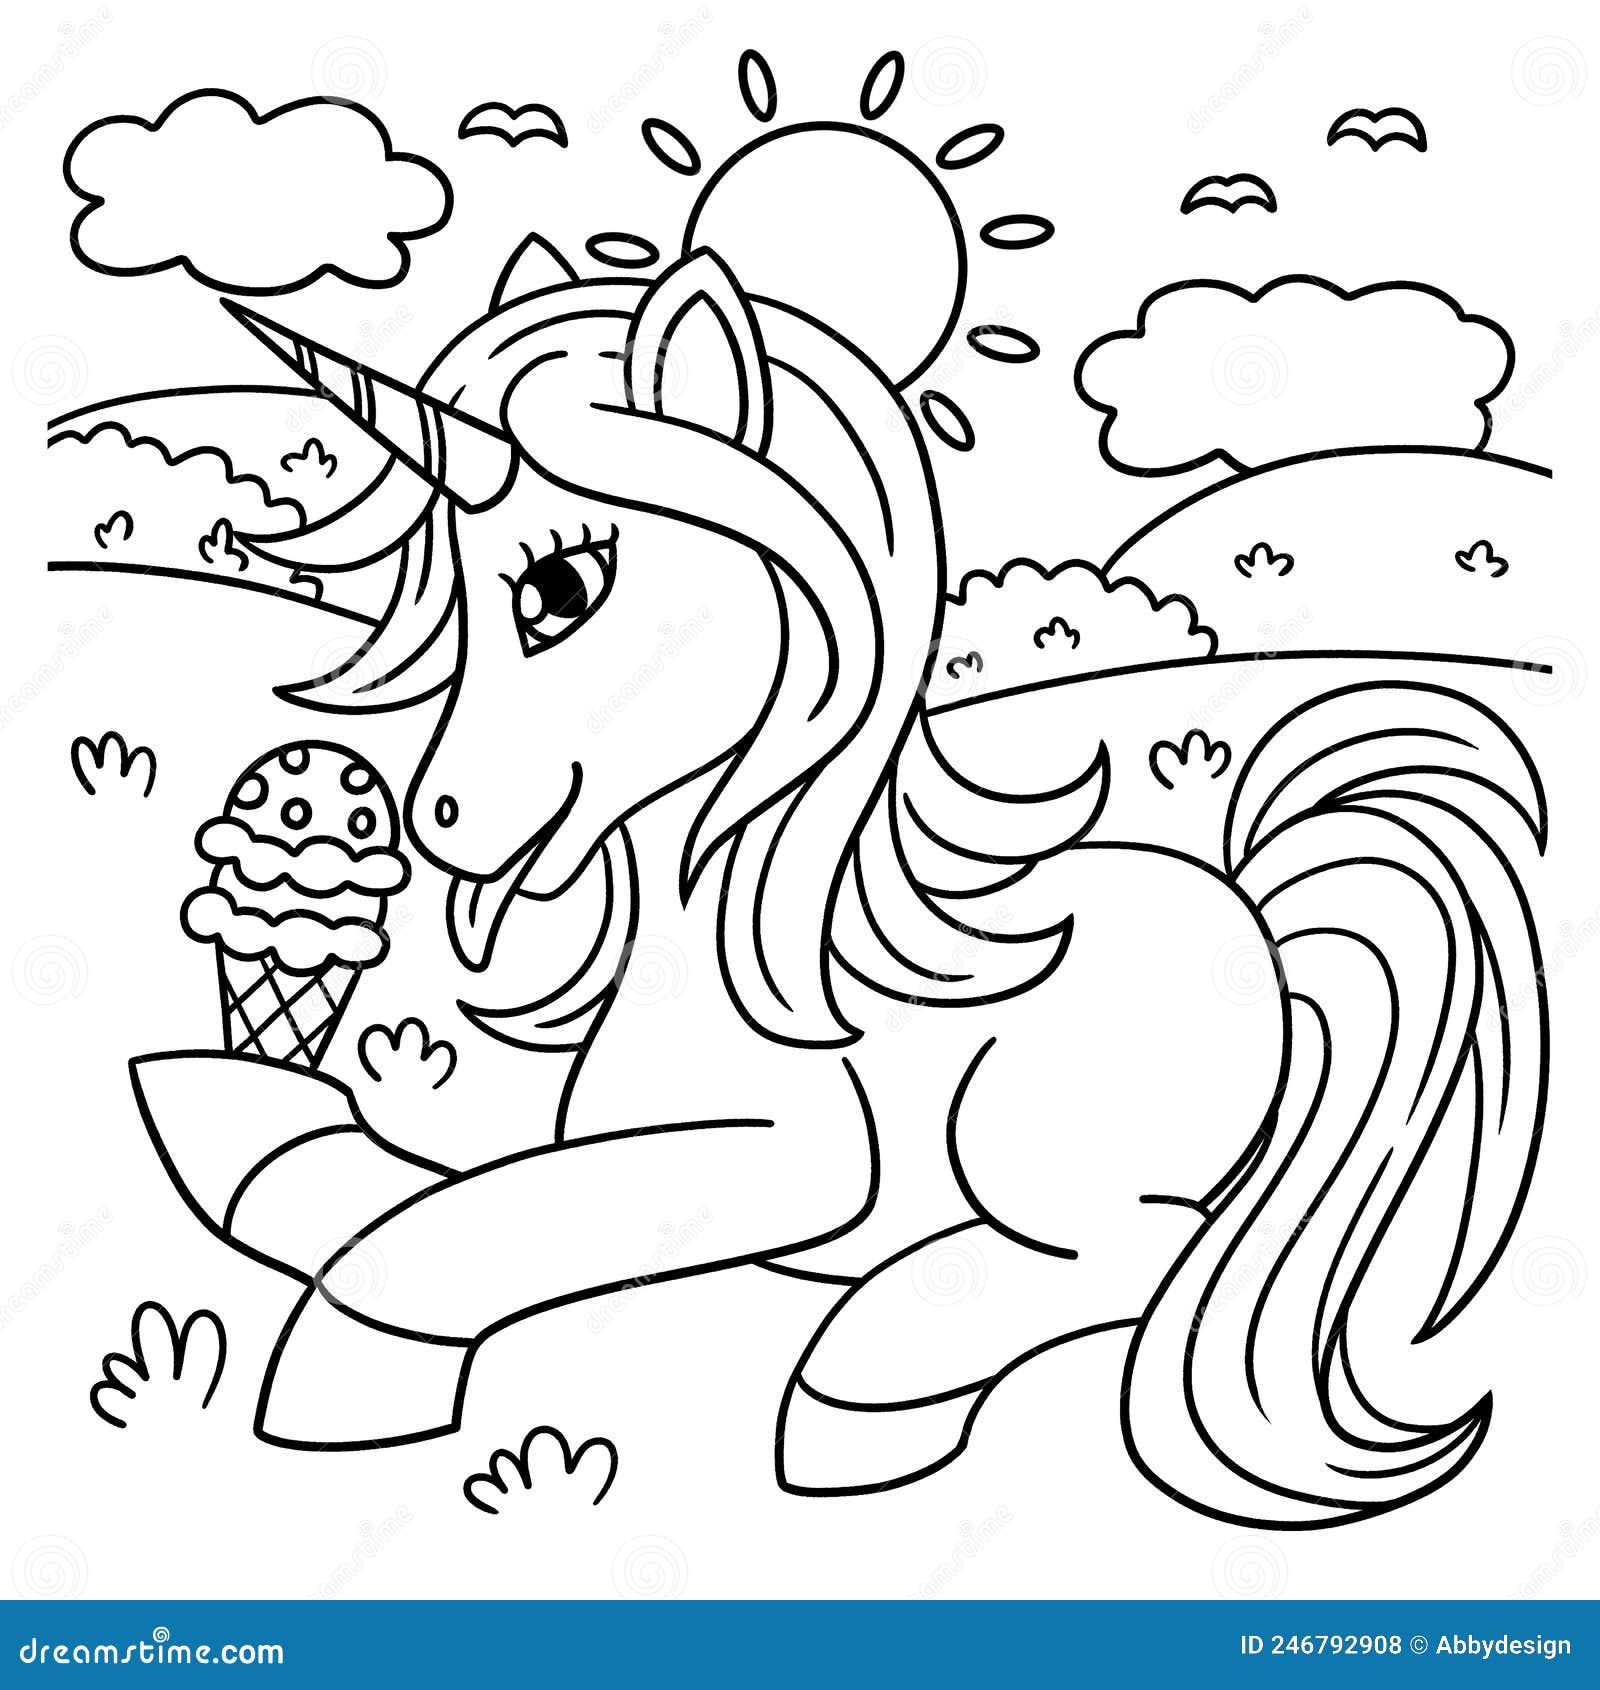 Unicorn eating ice cream coloring page for kids stock vector